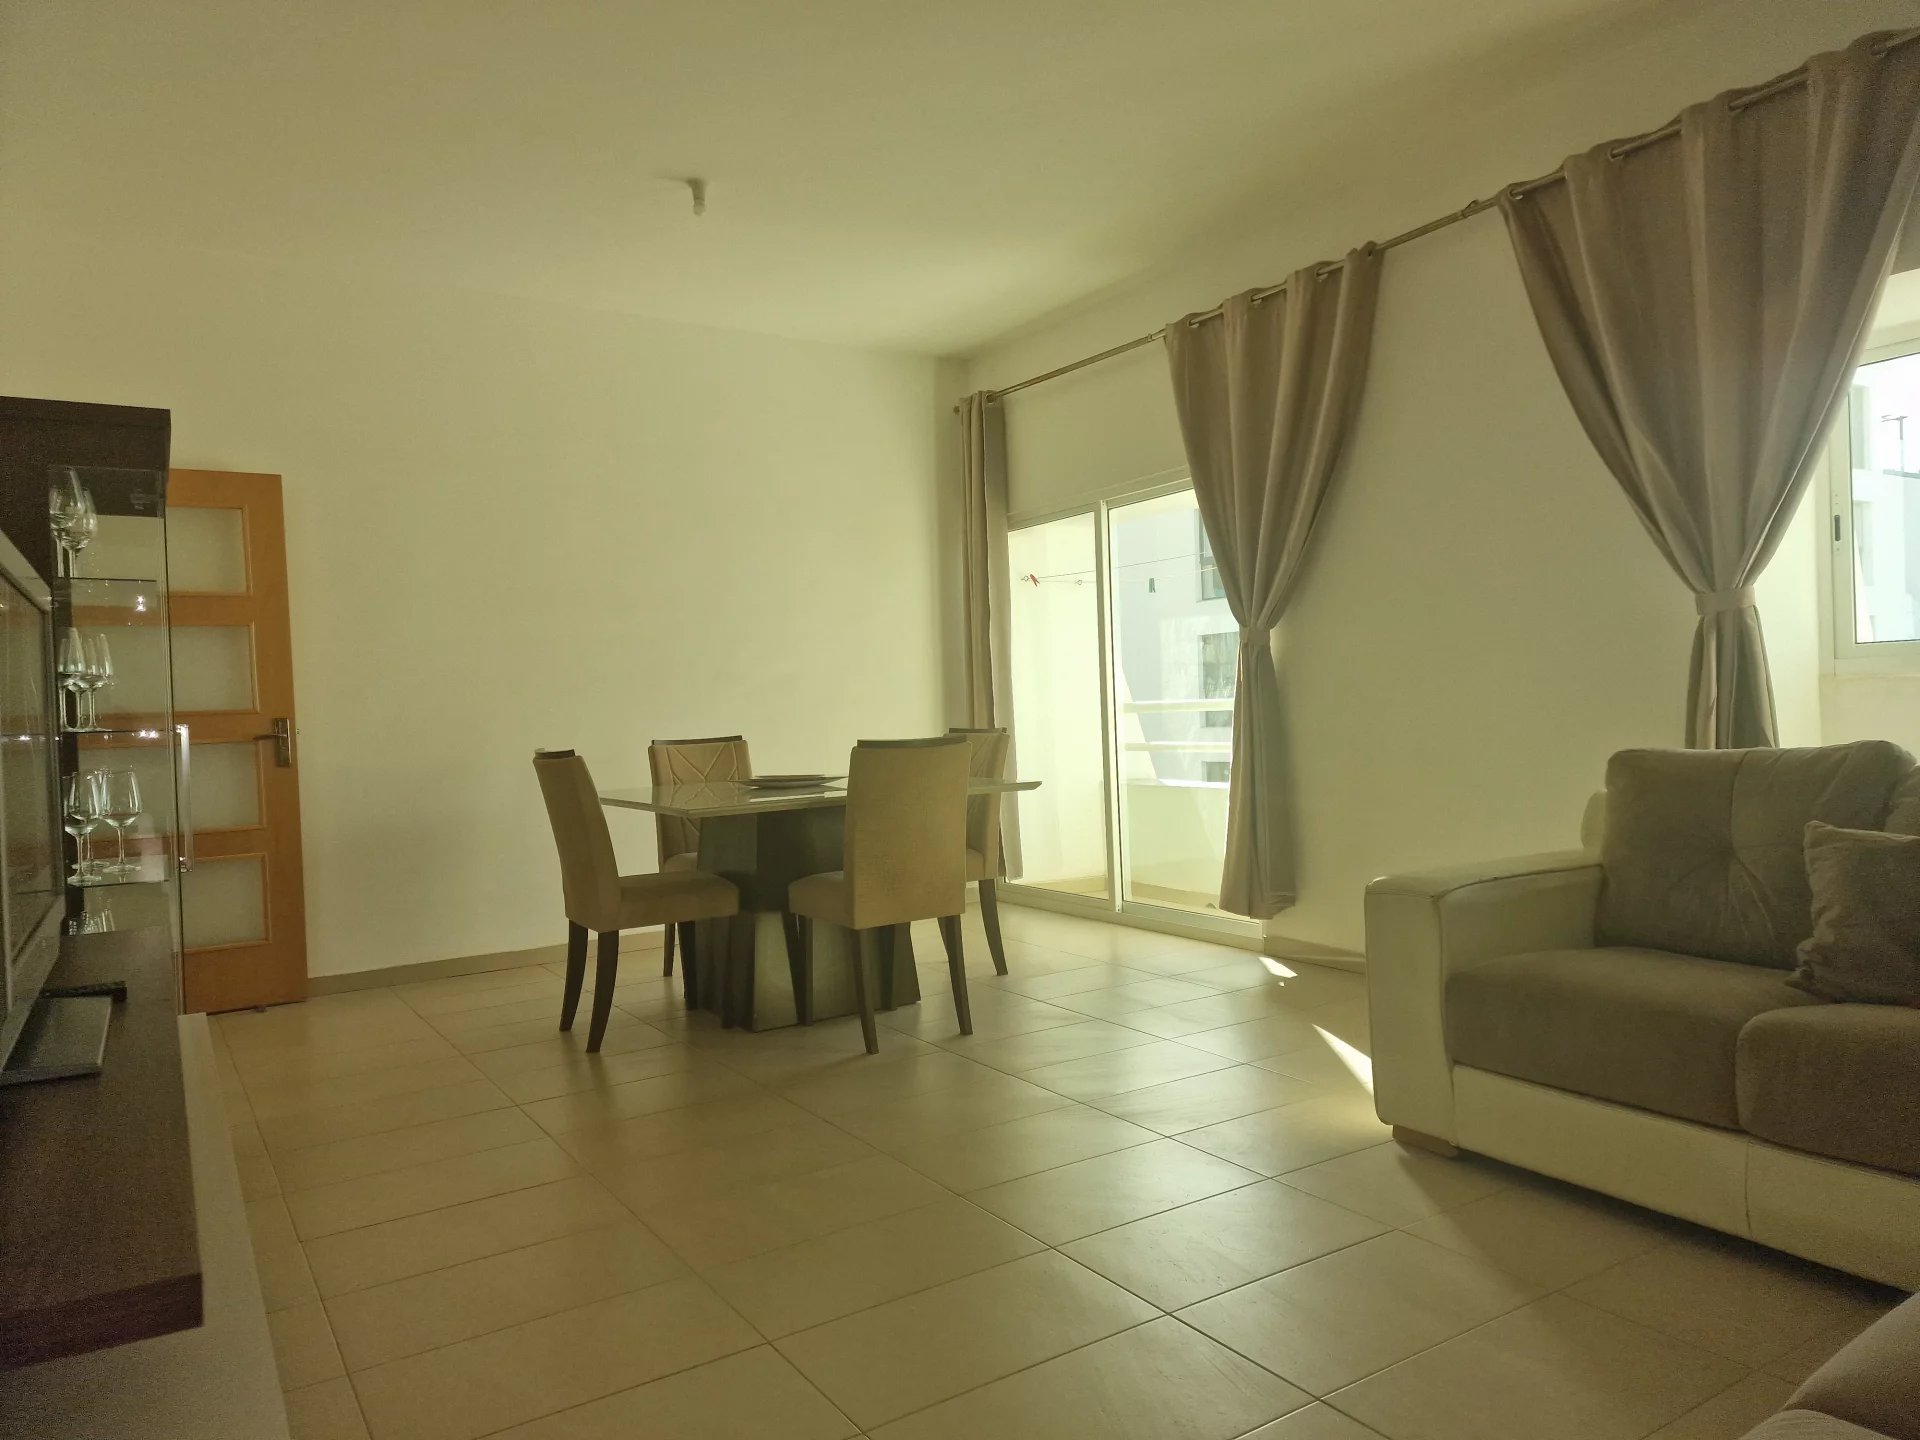 Flat to rent for your holidays in Praia